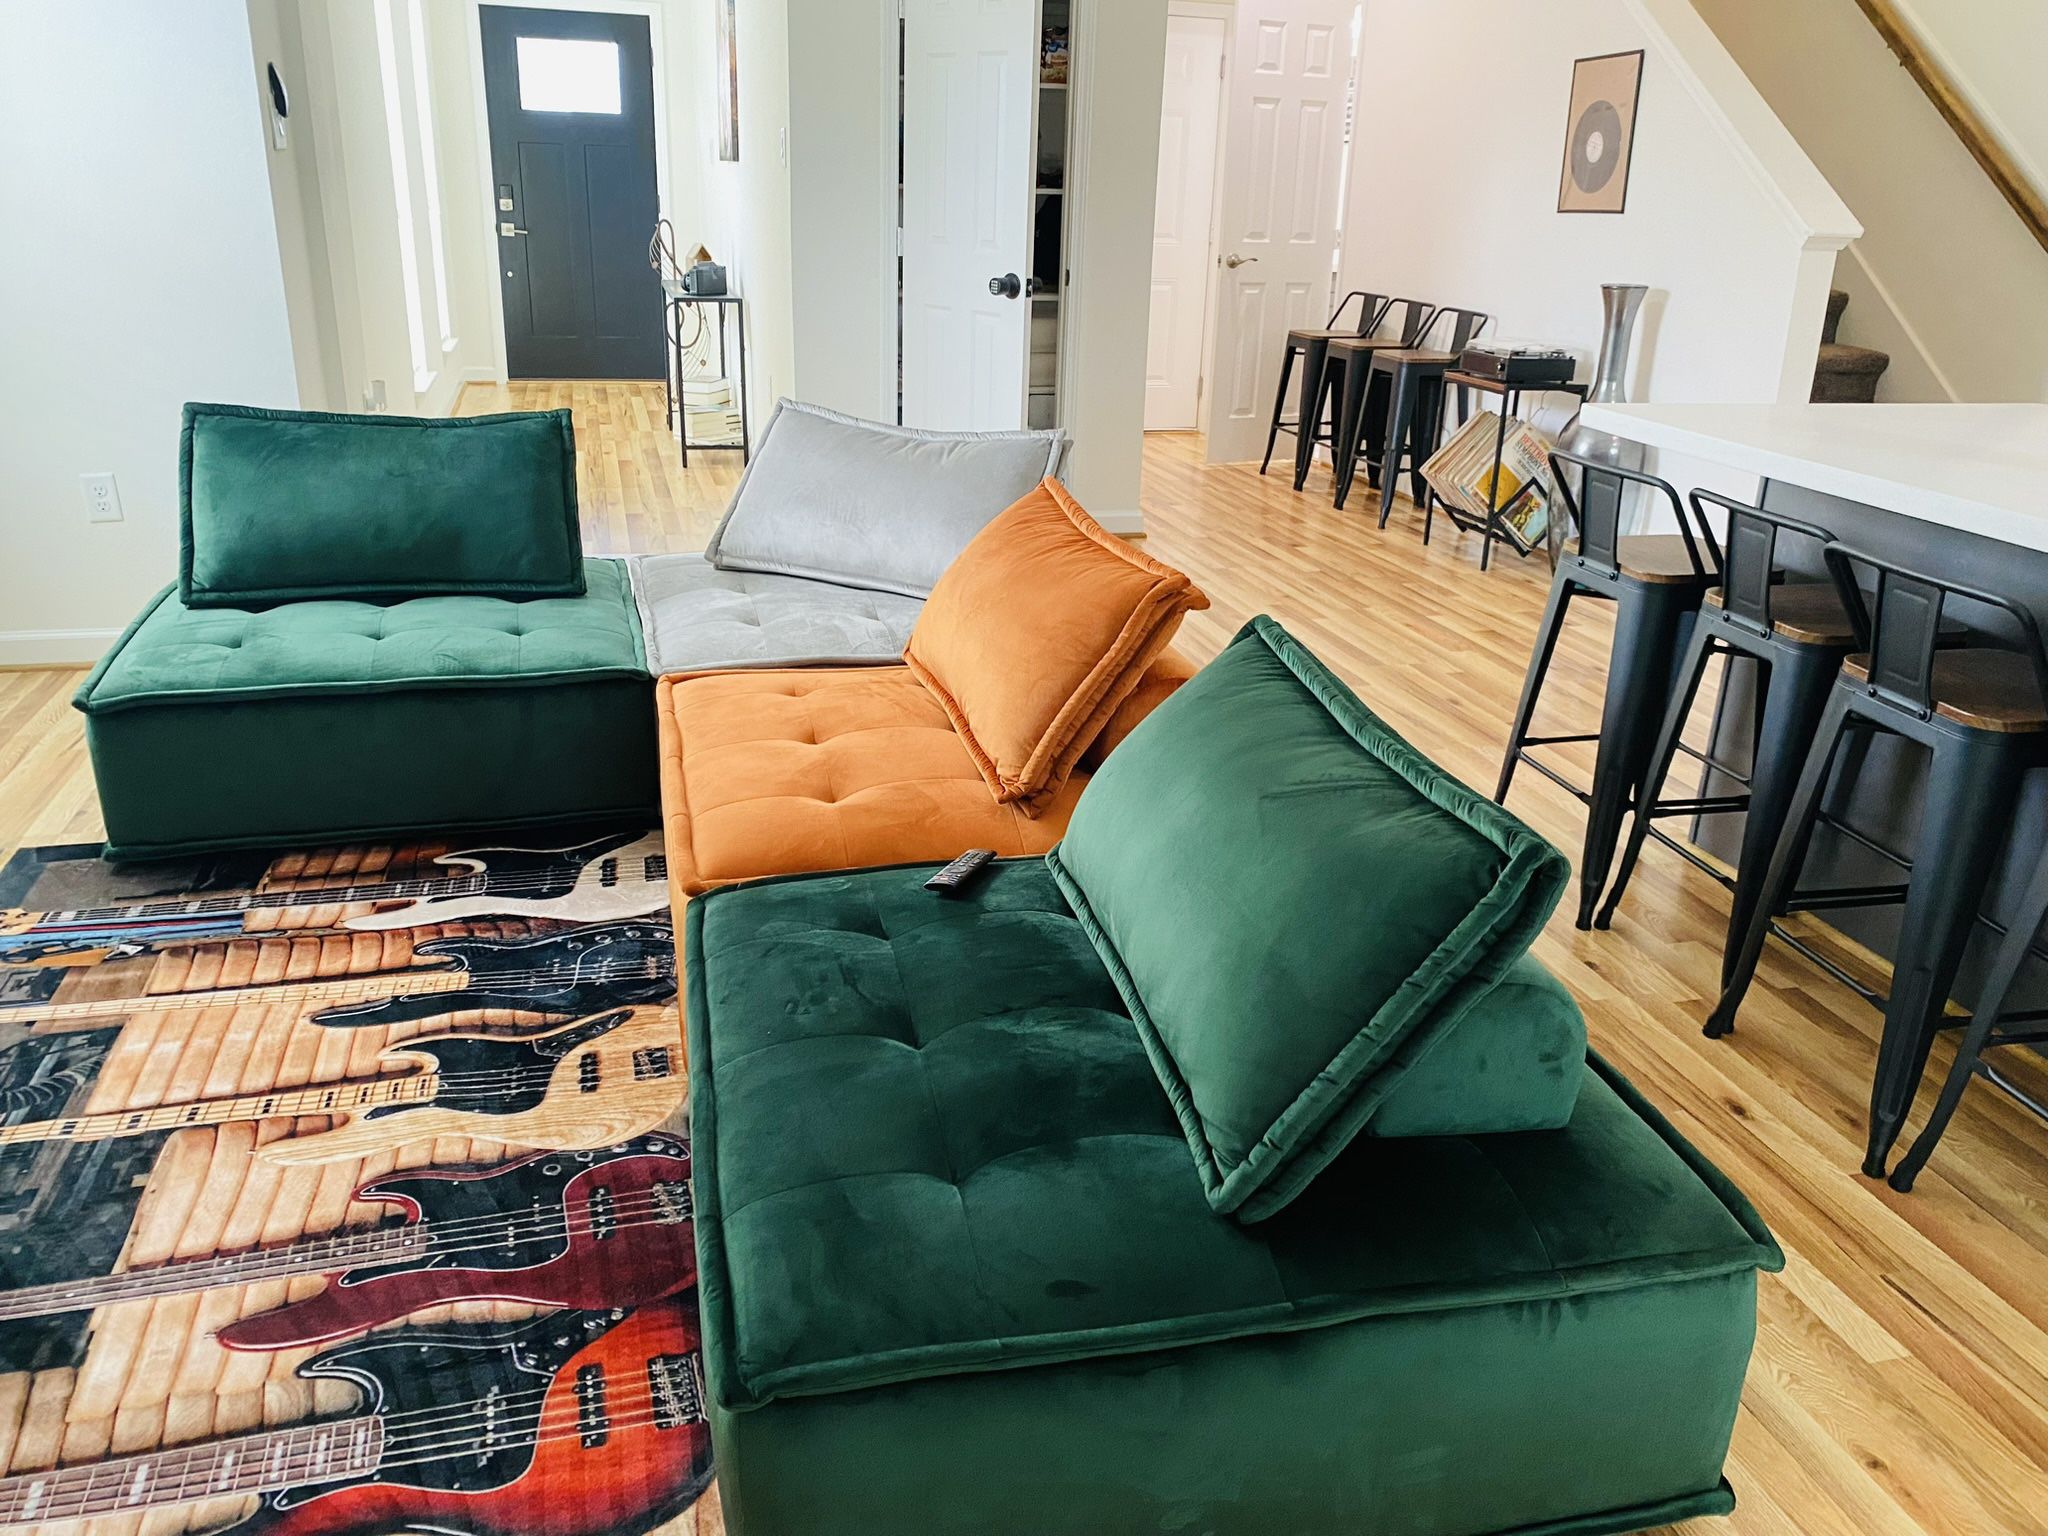 MUST GO ASAP!!! AIRBNB 6 months sale! Modern Rainbow Velvet Modular Sectional Sofa Couch Green and Orange